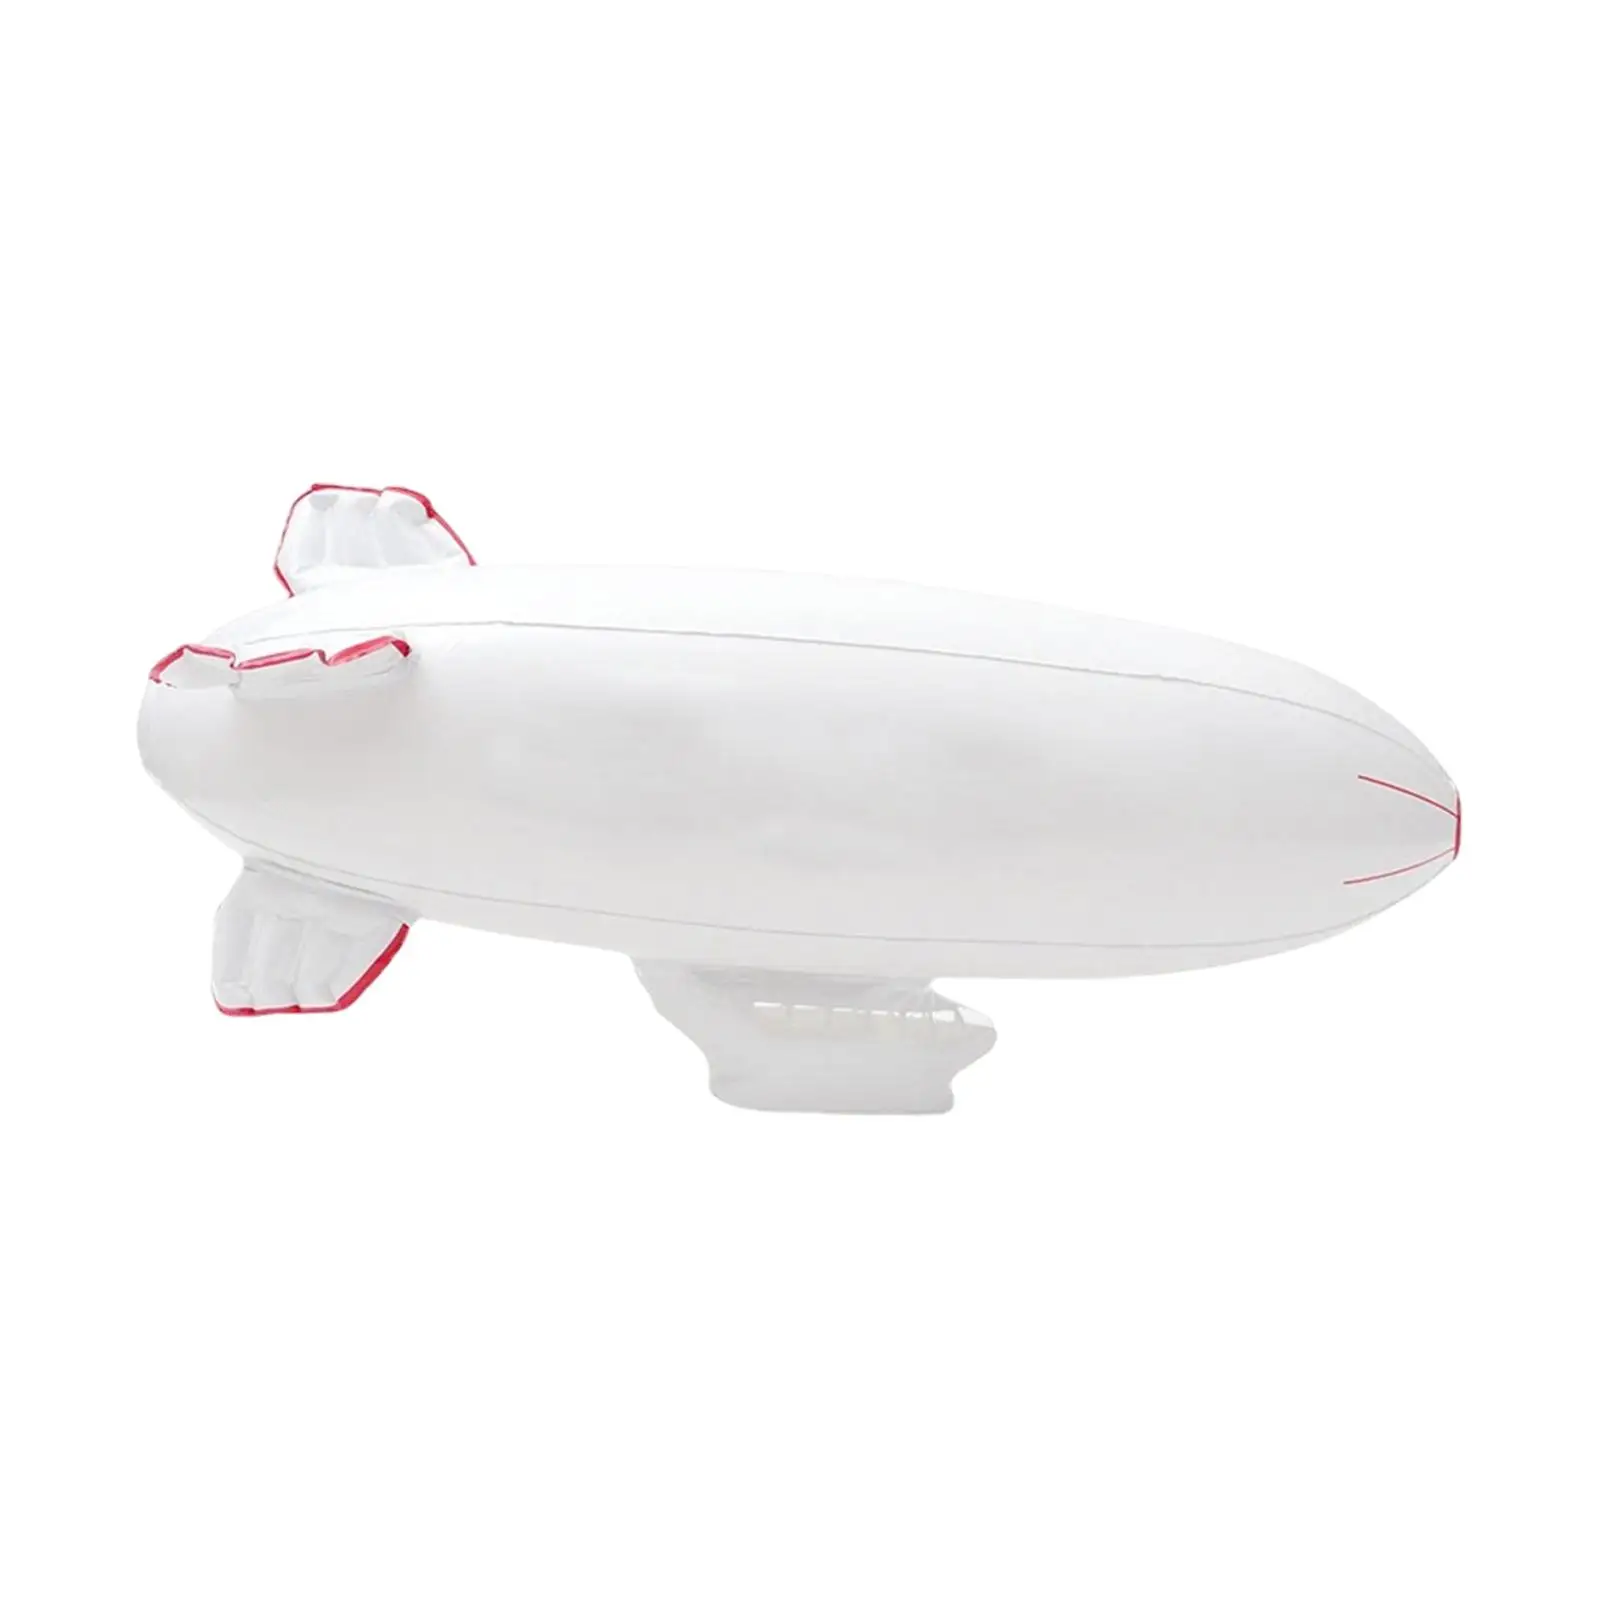 Nflatable Toy Light Weight Airplane Model for Celebration Birthday Party